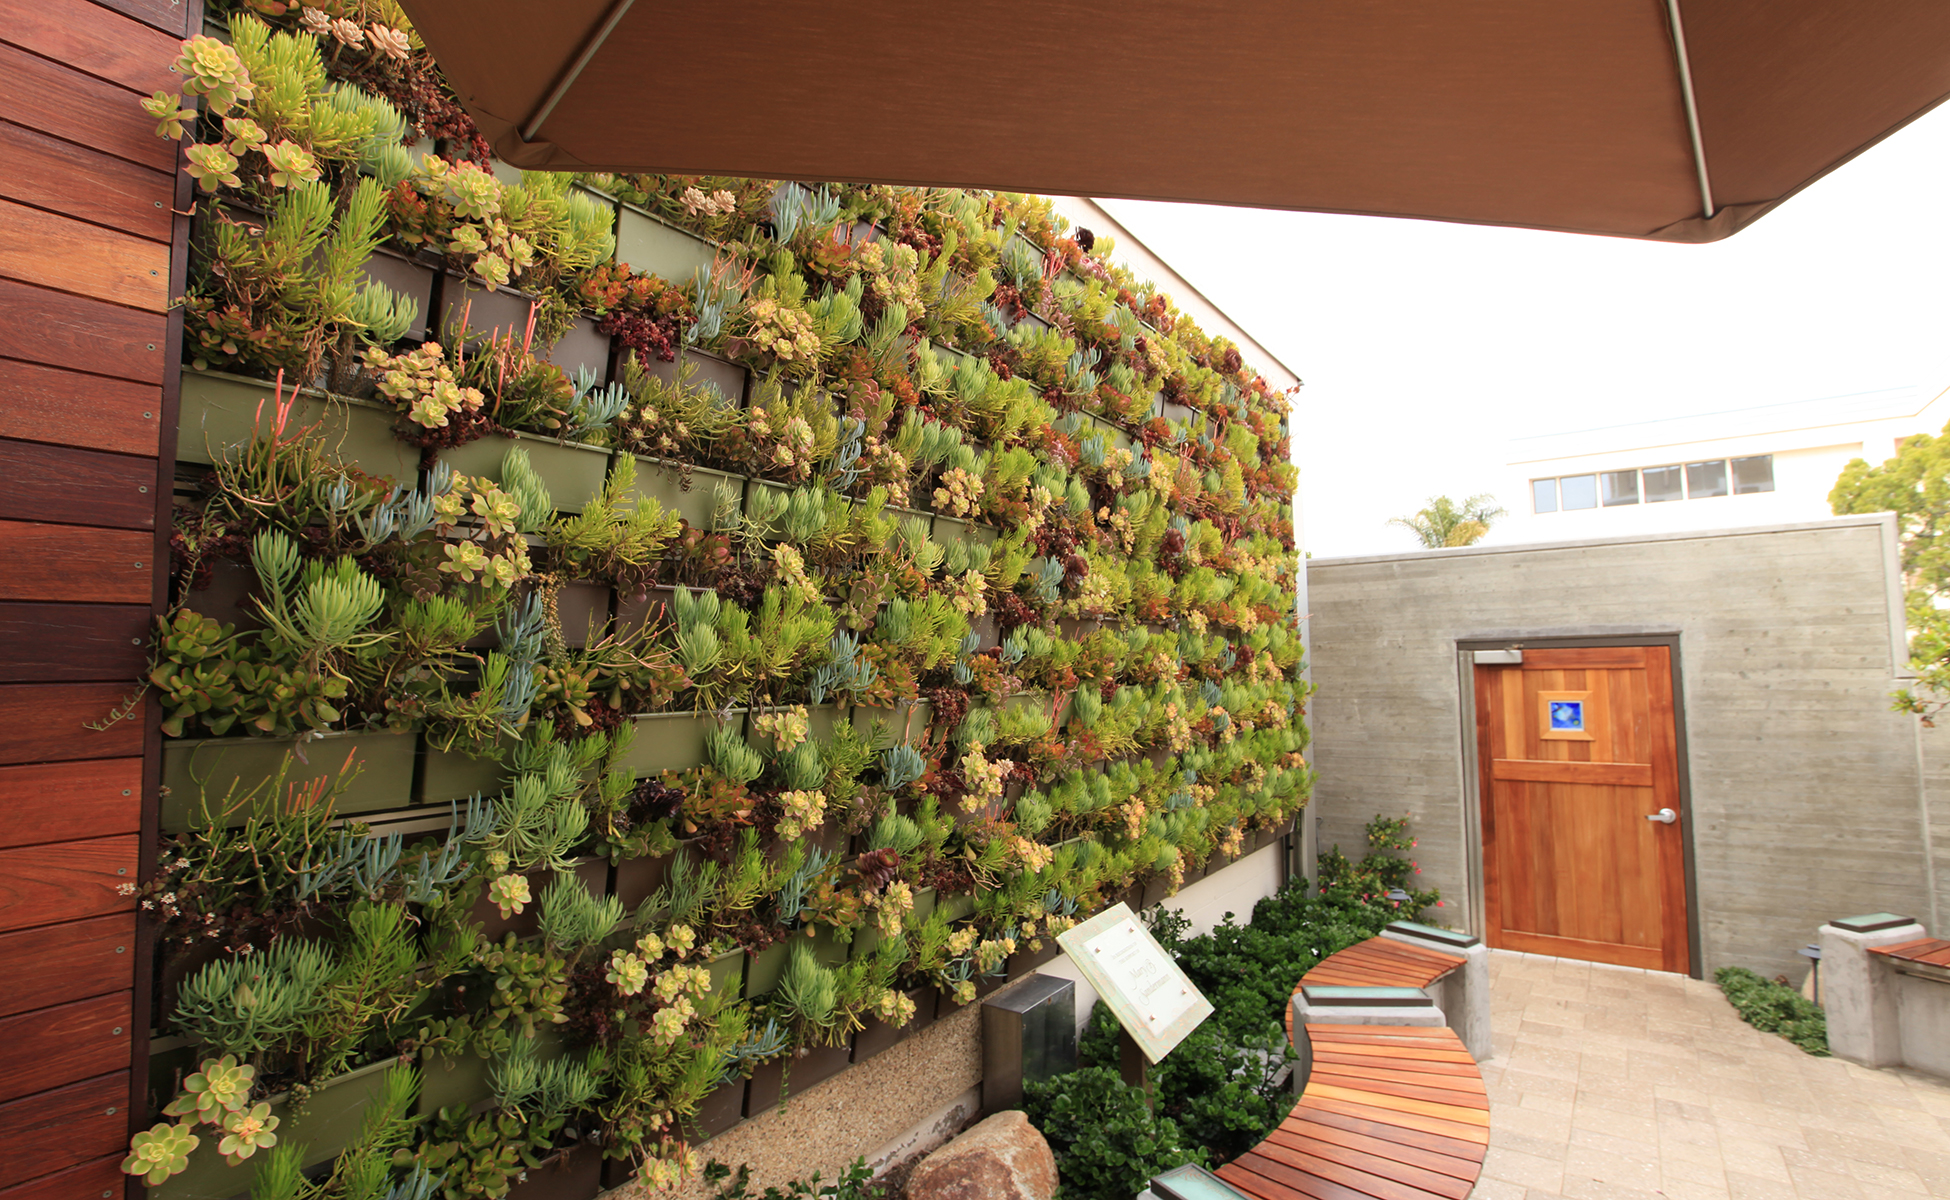 Exterior succulent living wall in warm climate.